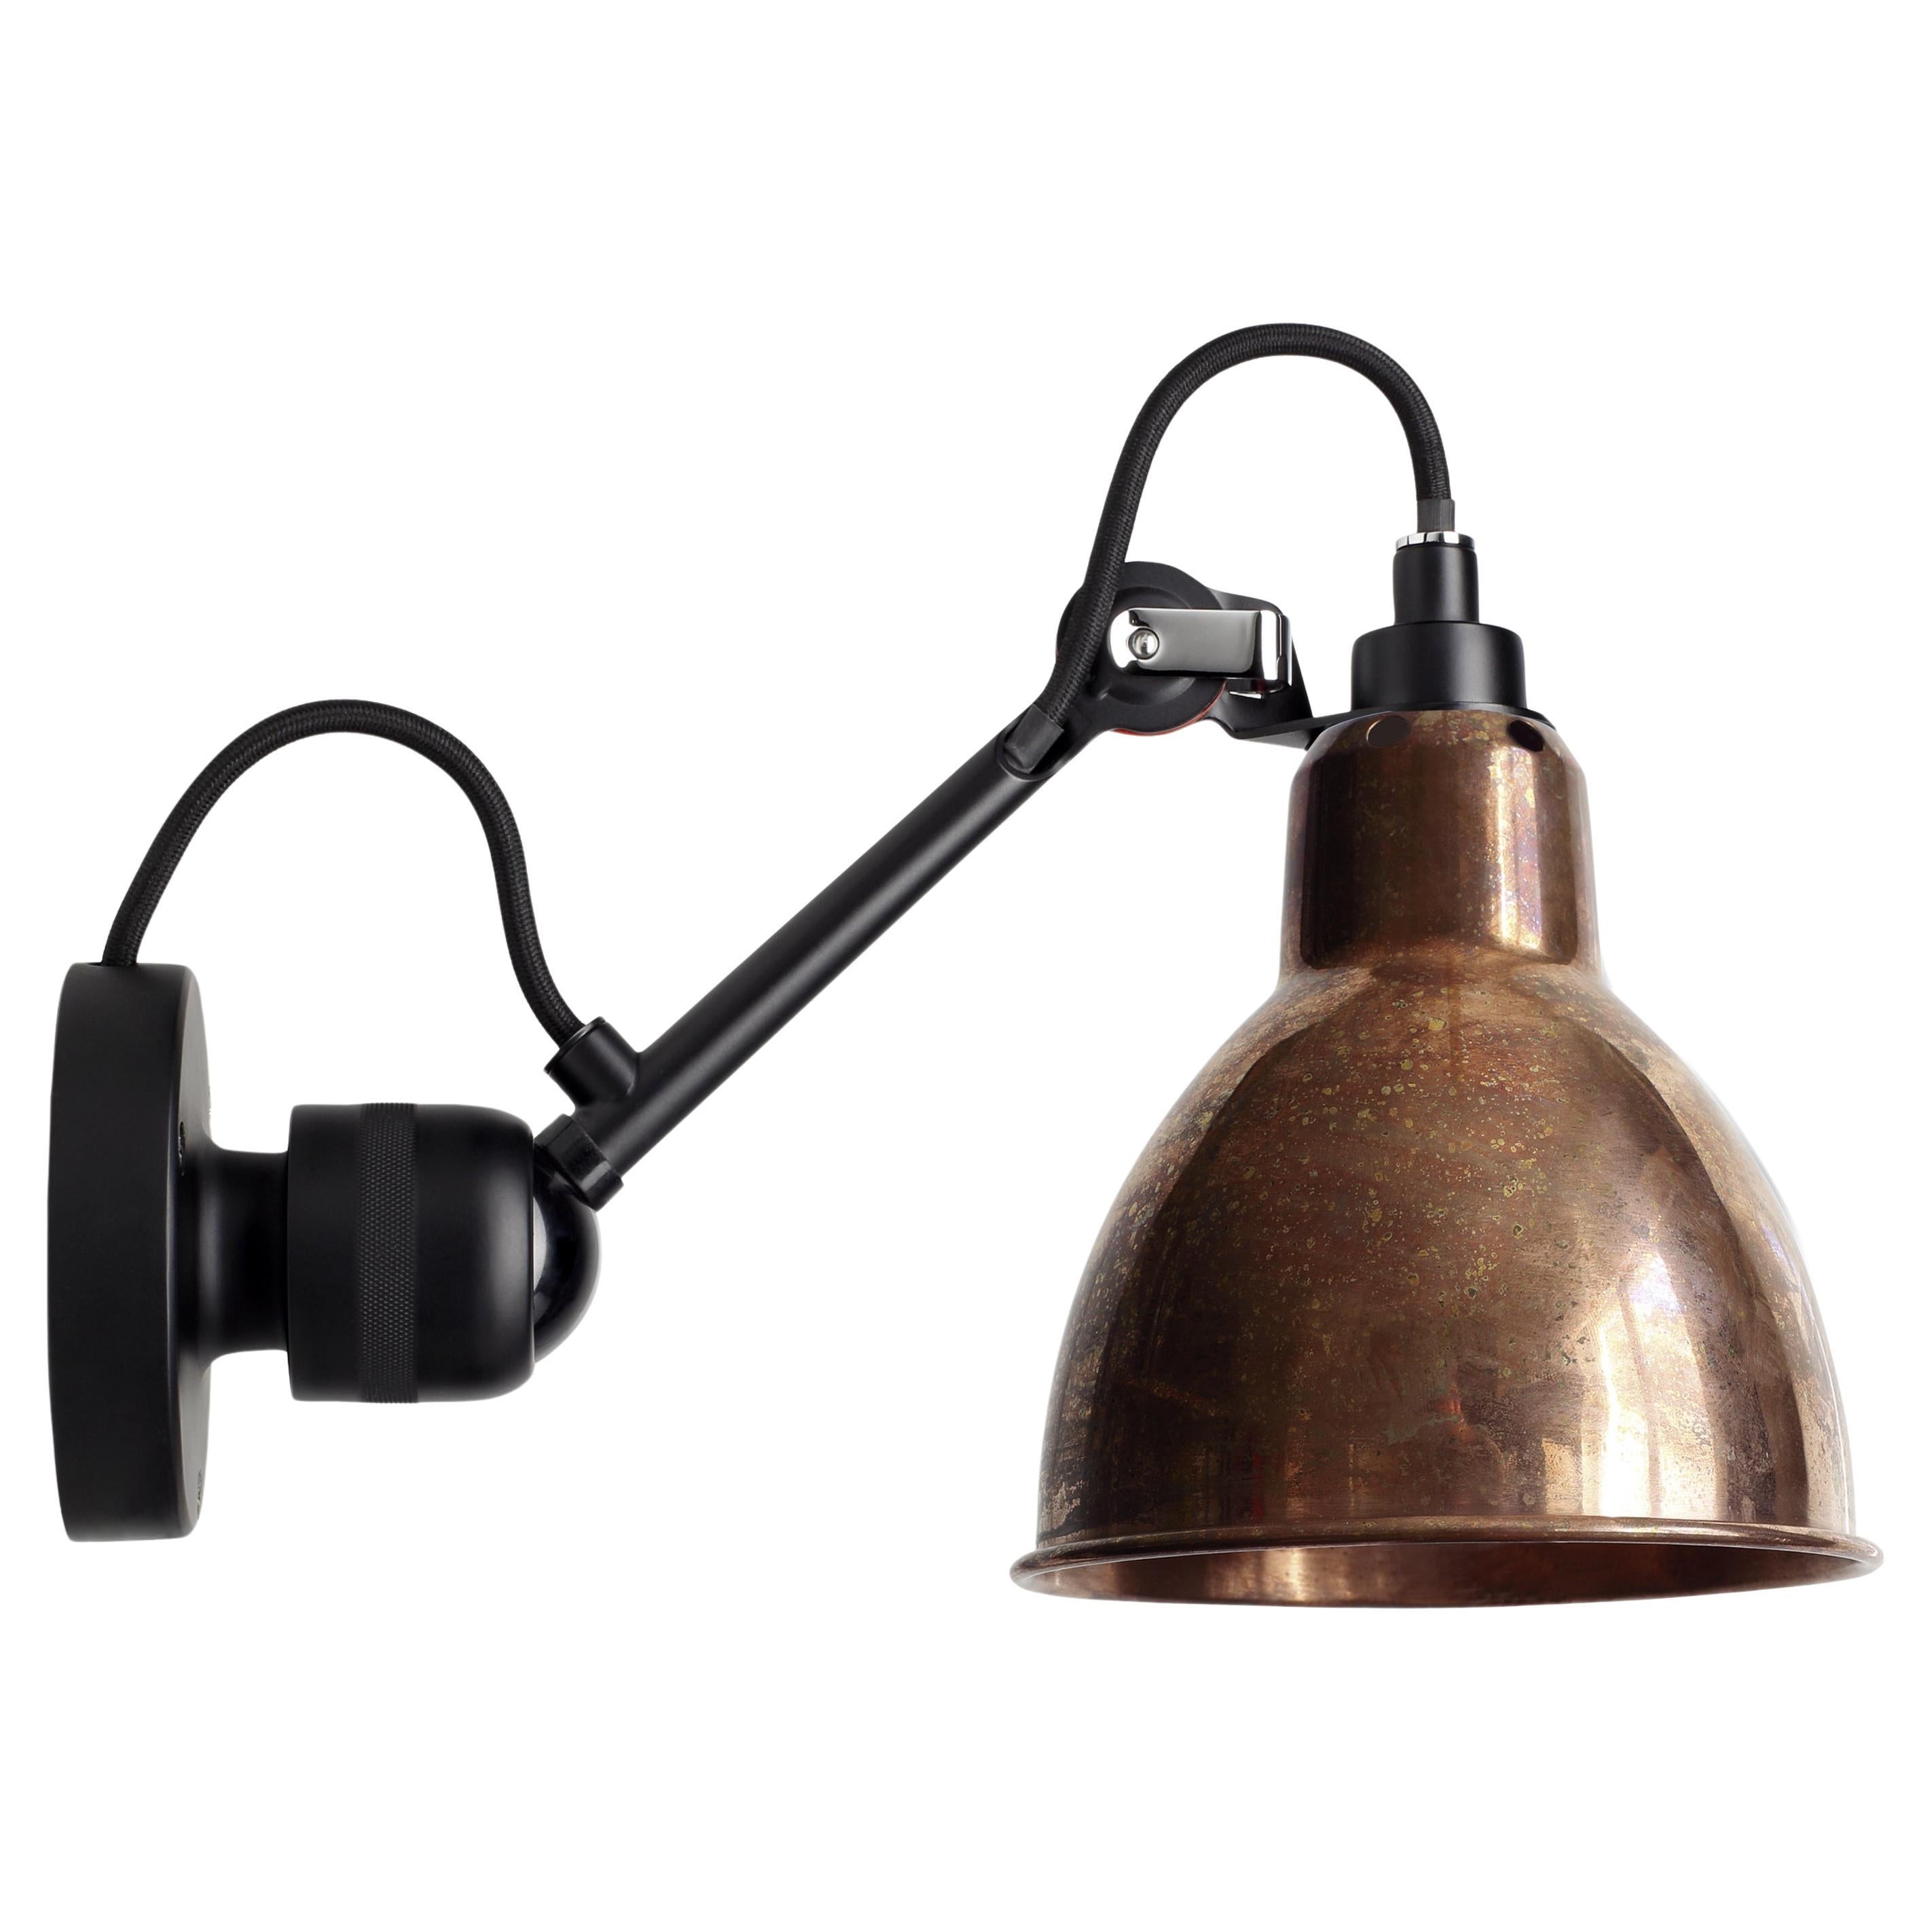 DCW Editions La Lampe Gras N°304 Wall Lamp in Black Arm and Raw Copper Shade For Sale